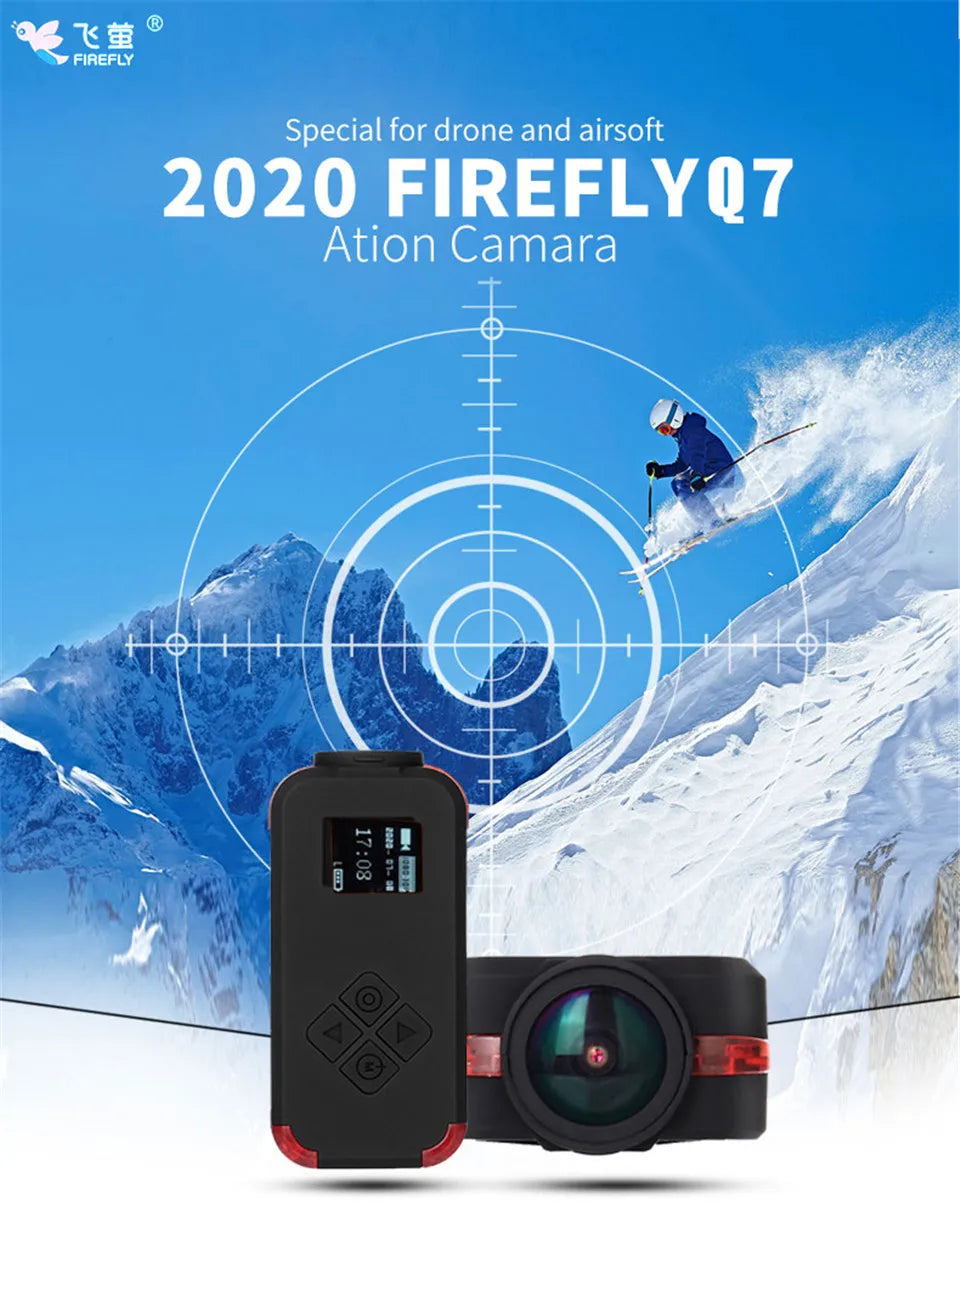 Hawkeye Firefly Q7 Action Camera, 72 firefly Special for drone and airsoft 2020 FIREFLYQ7 Ation